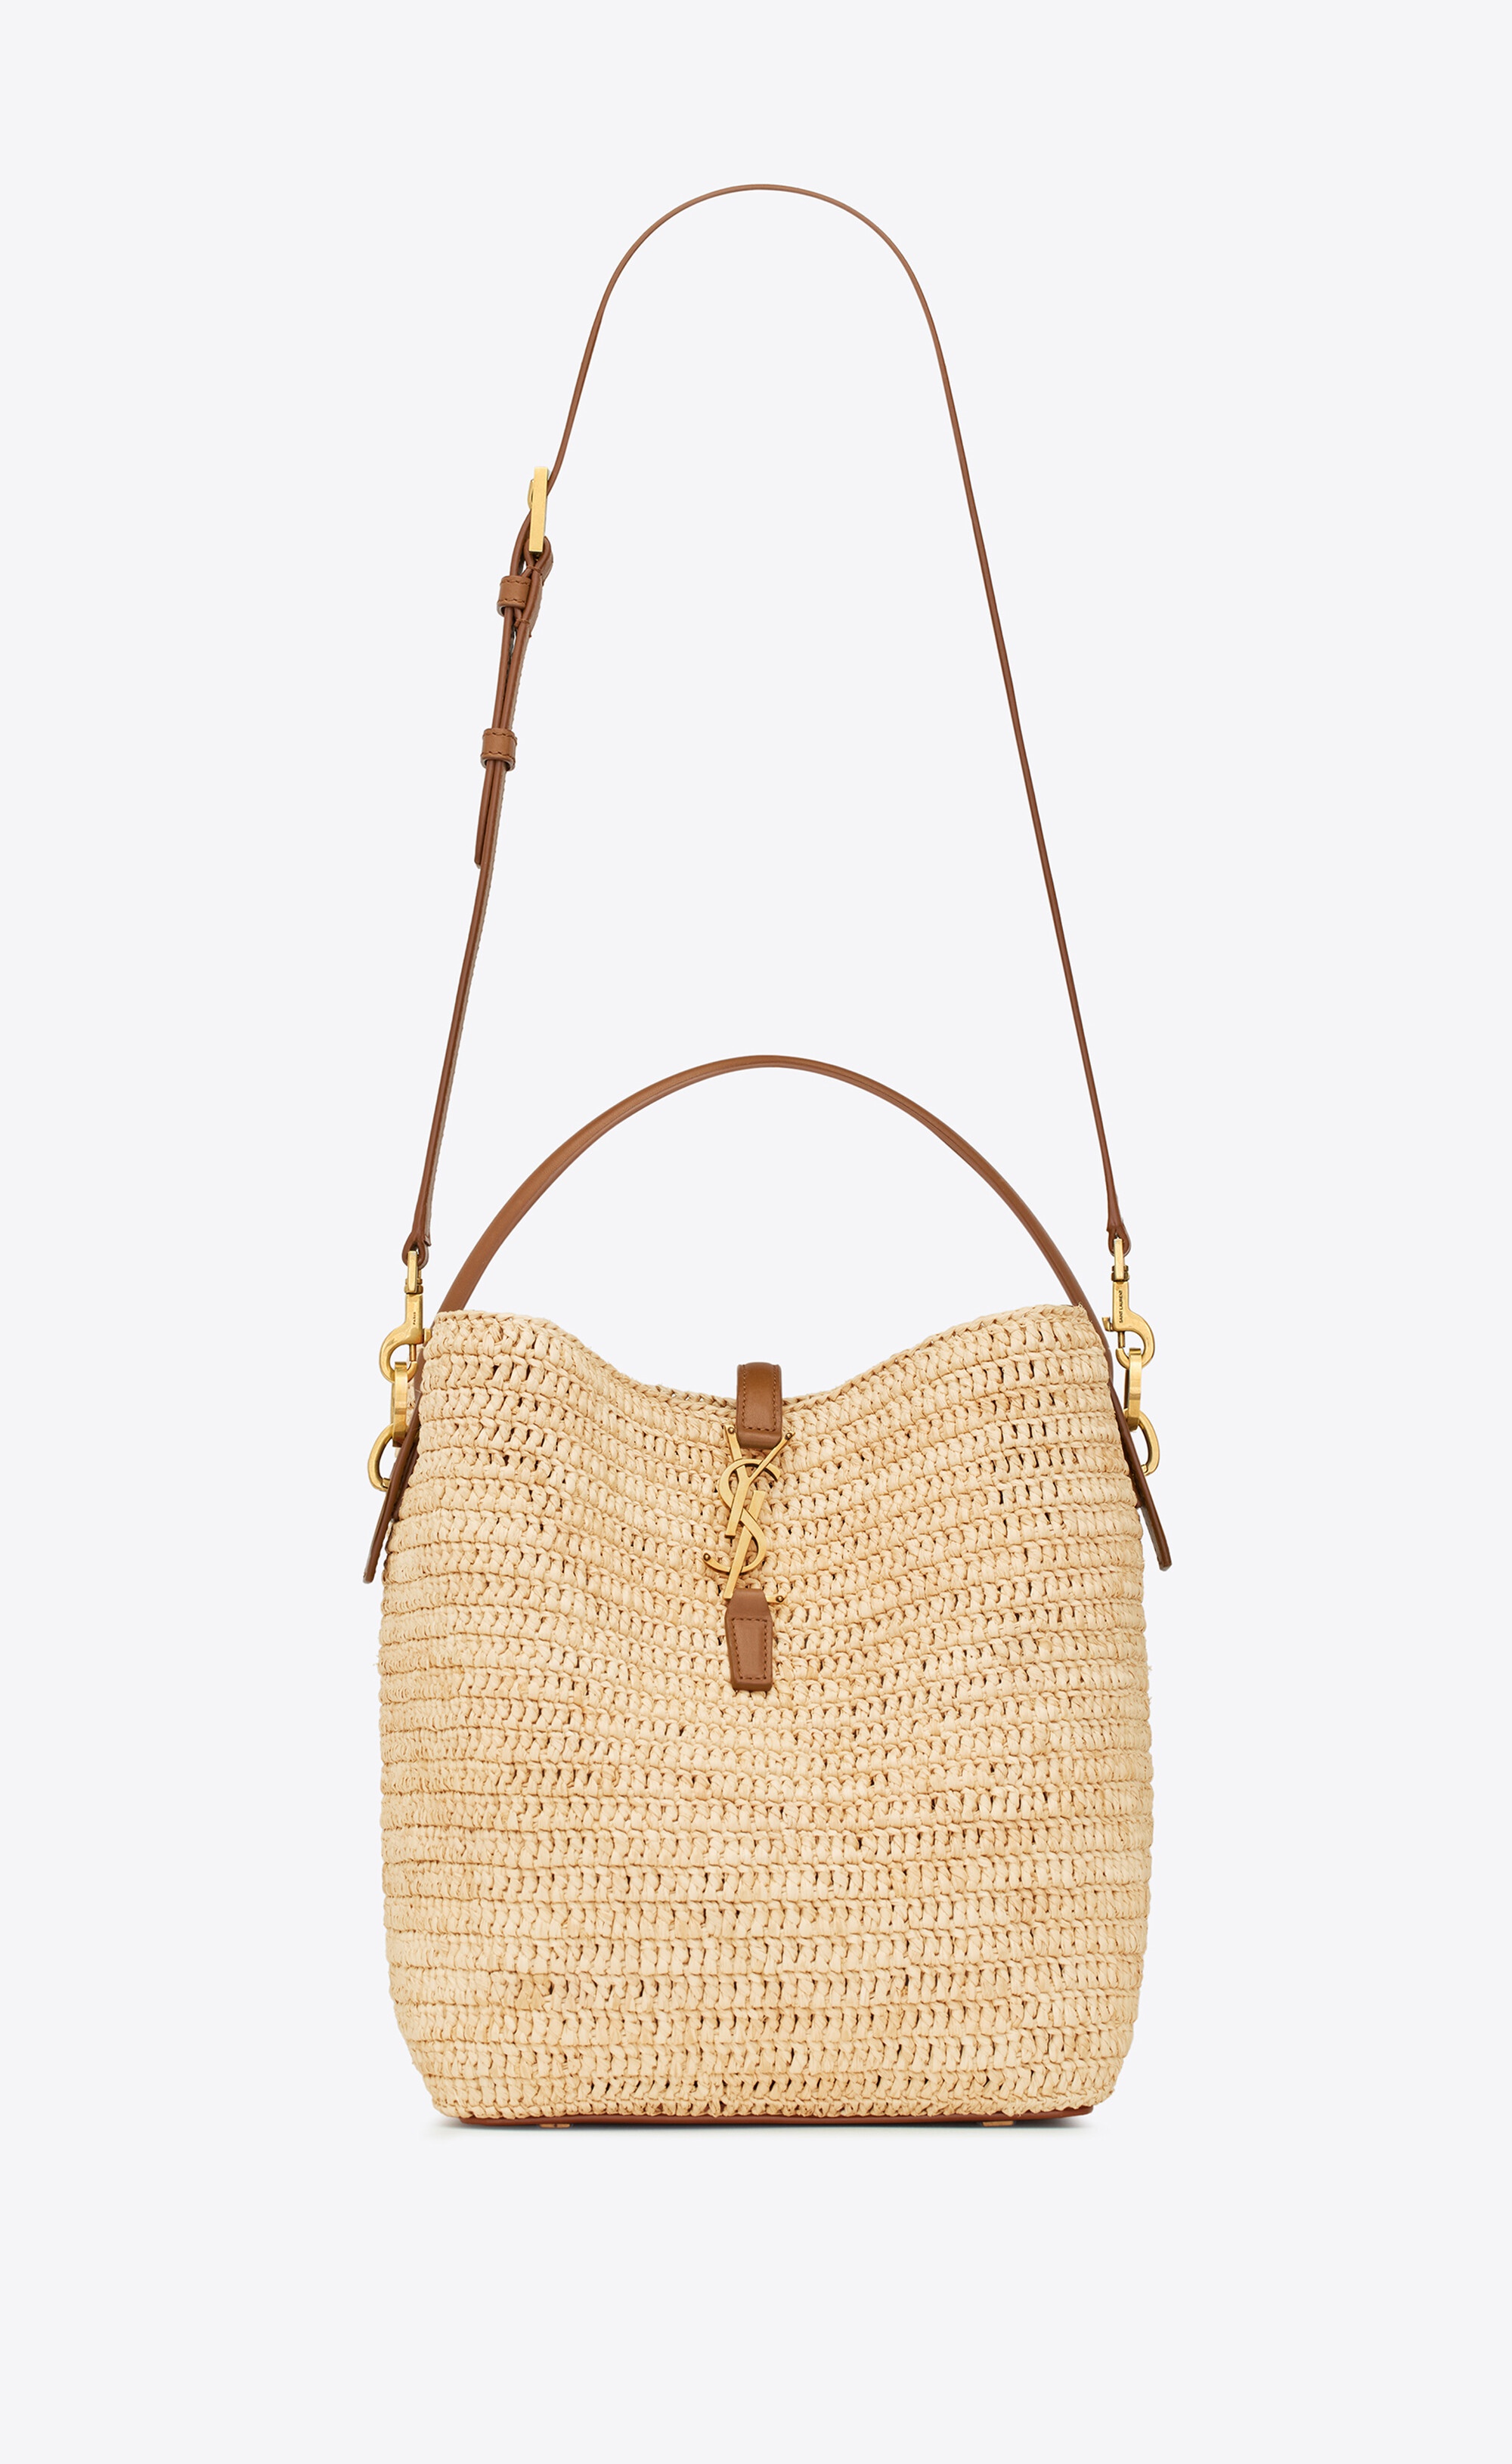 le 37 in woven raffia and vegetable-tanned leather - 3